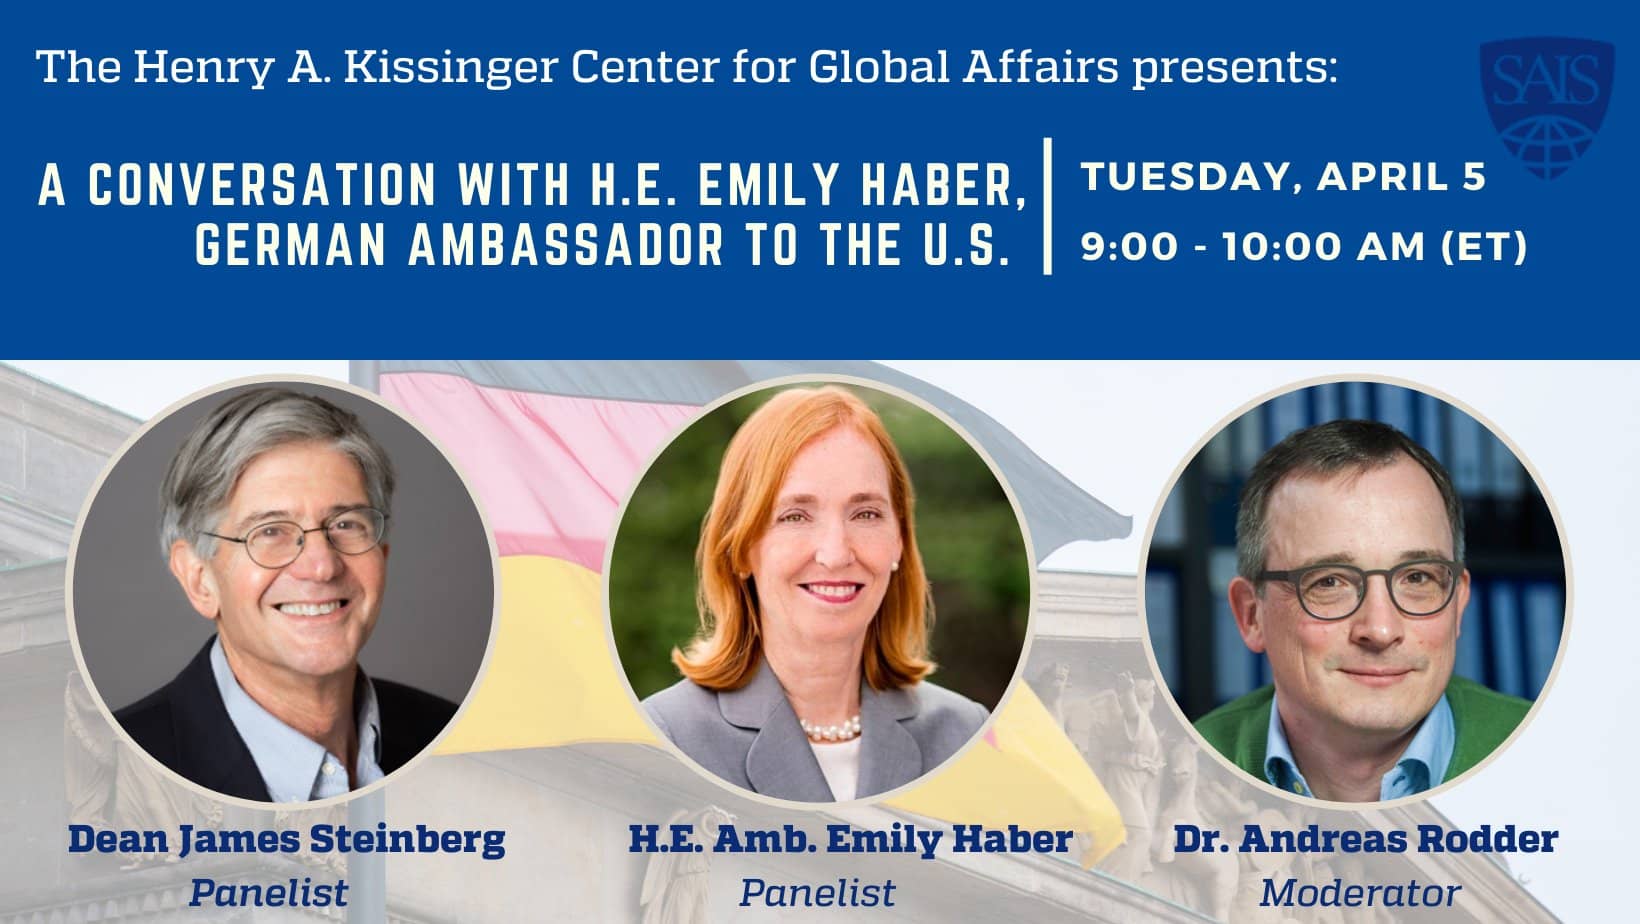 The Henry A. Kissinger Center for Global Affairs presents: A Conversation with H.E. Emily Haber, German Ambassador to the U.S. Tuesday, April 5. 9:00-10:00 AM (ET). Dean James Steinberg, Panelist; H.E. Amb. Emily Haber, Panelist; Dr. Andreas Rodder, Moder